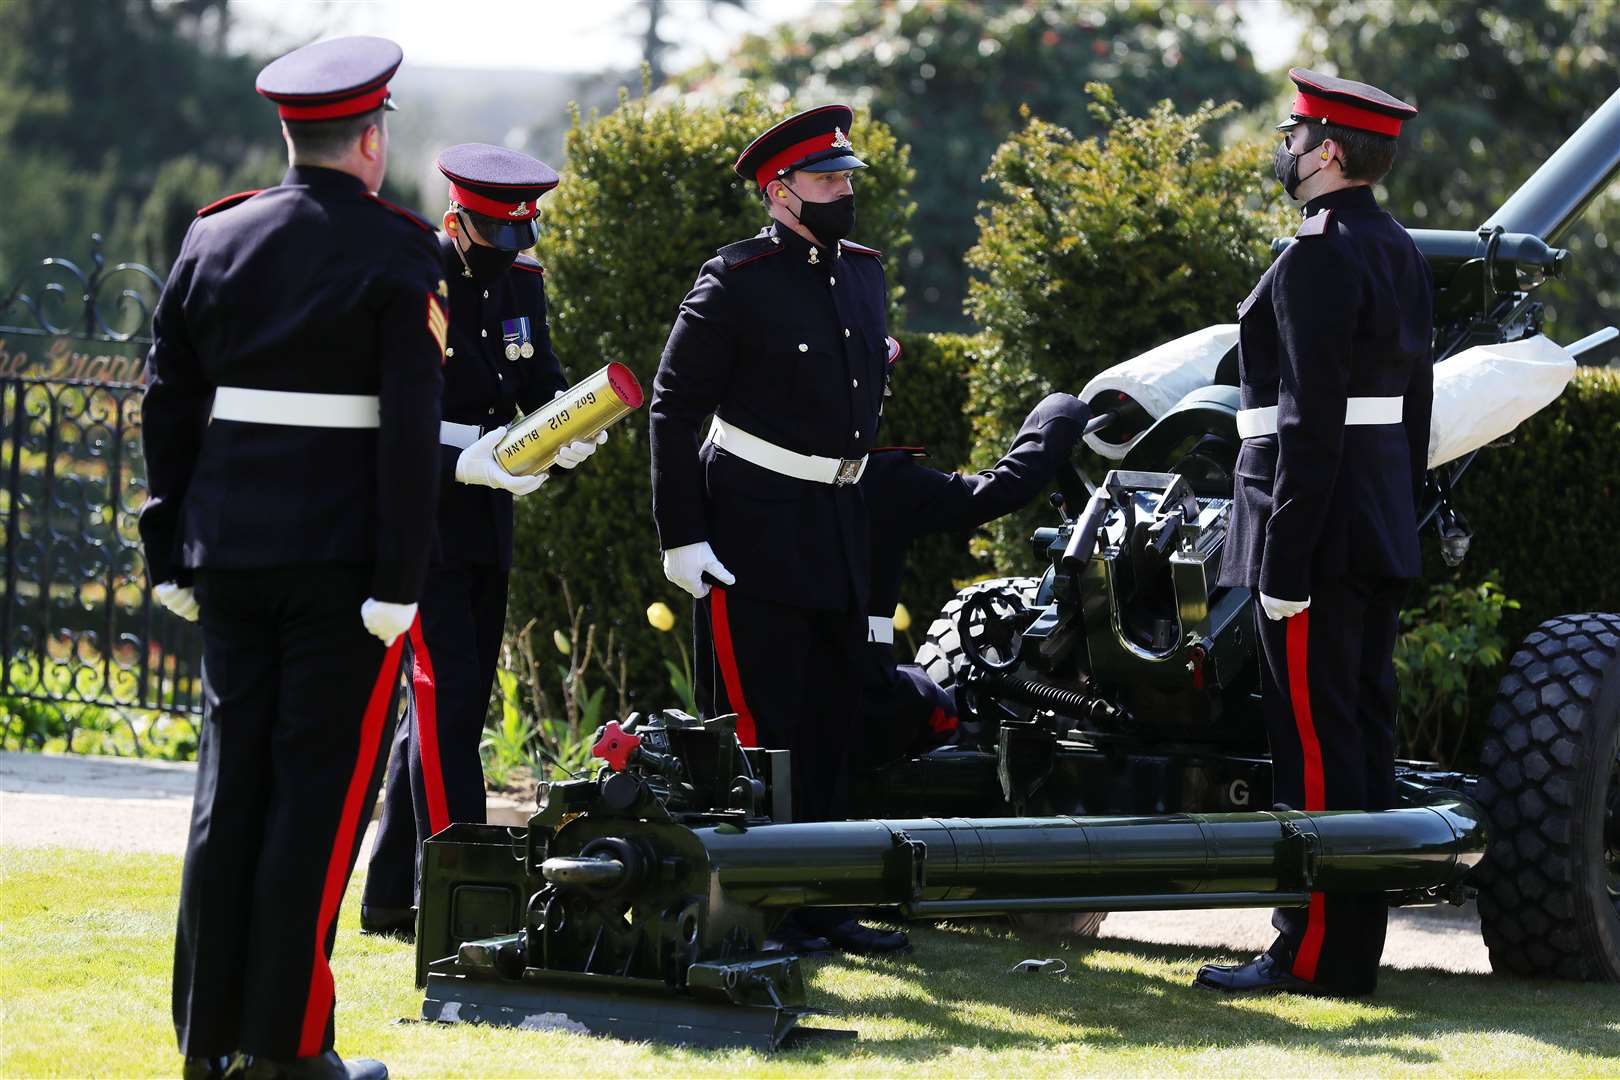 Personnel from 206 (Ulster) Battery Royal Artillery conduct a gun salute at Hillsborough Castle, Co Down (Kelvin Boyes/Press Eye/PA Wire)